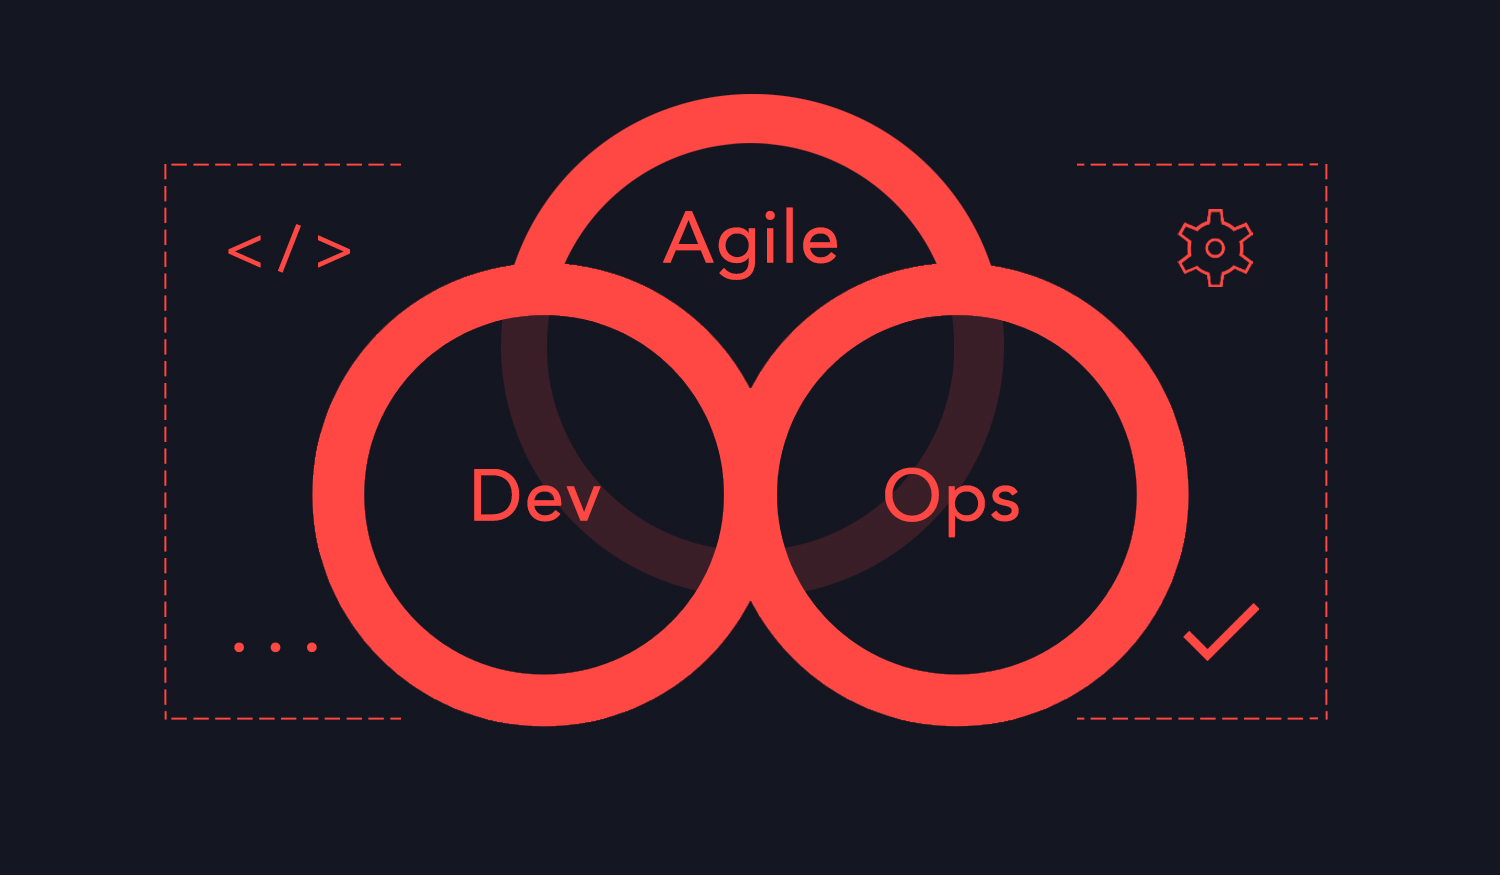 Speed up software delivery with Agile DevOps